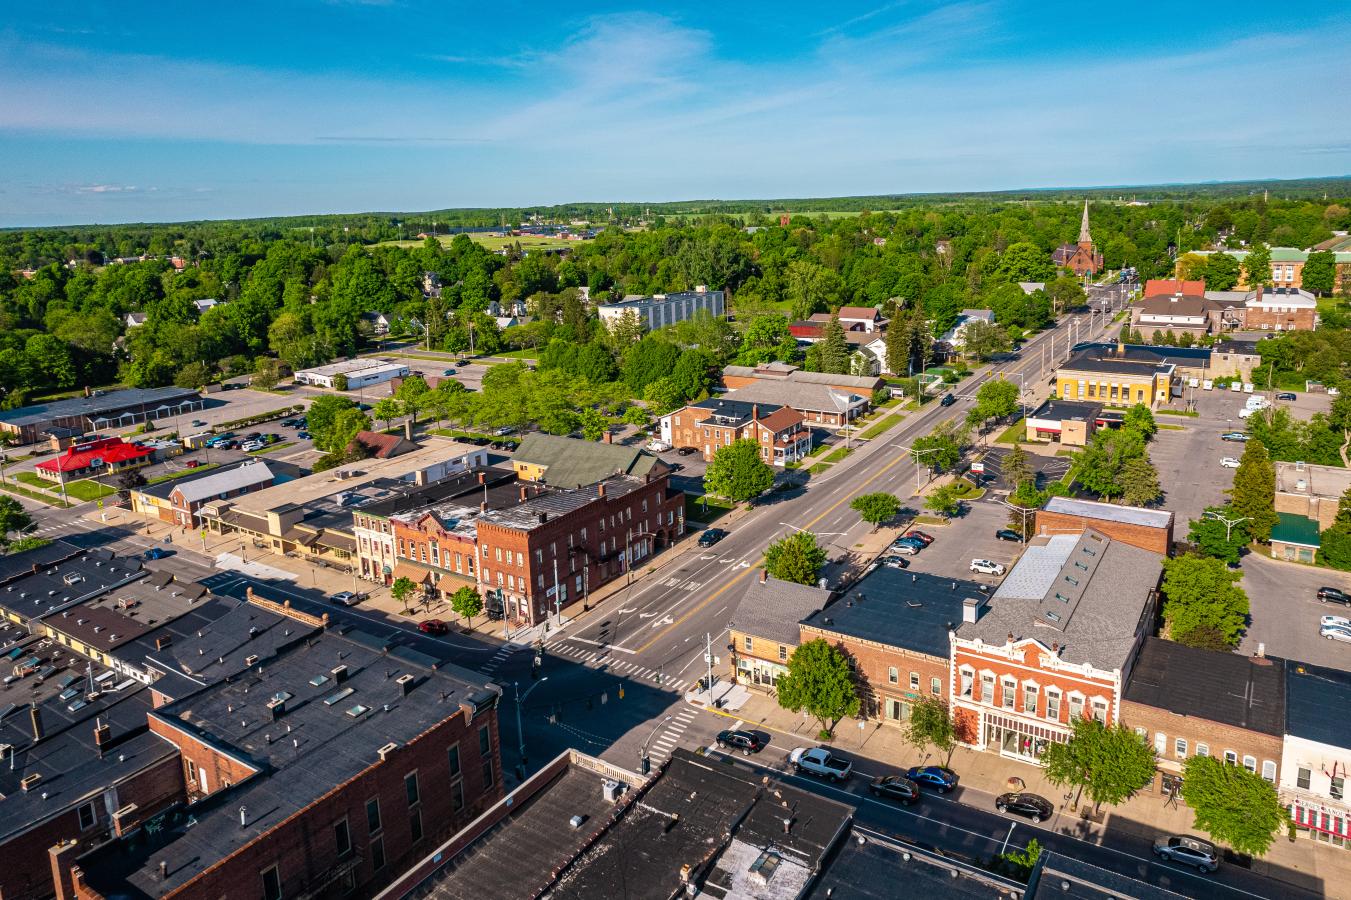 Arial view of Potsdam, NY. Brick buildings and trees line the streets.